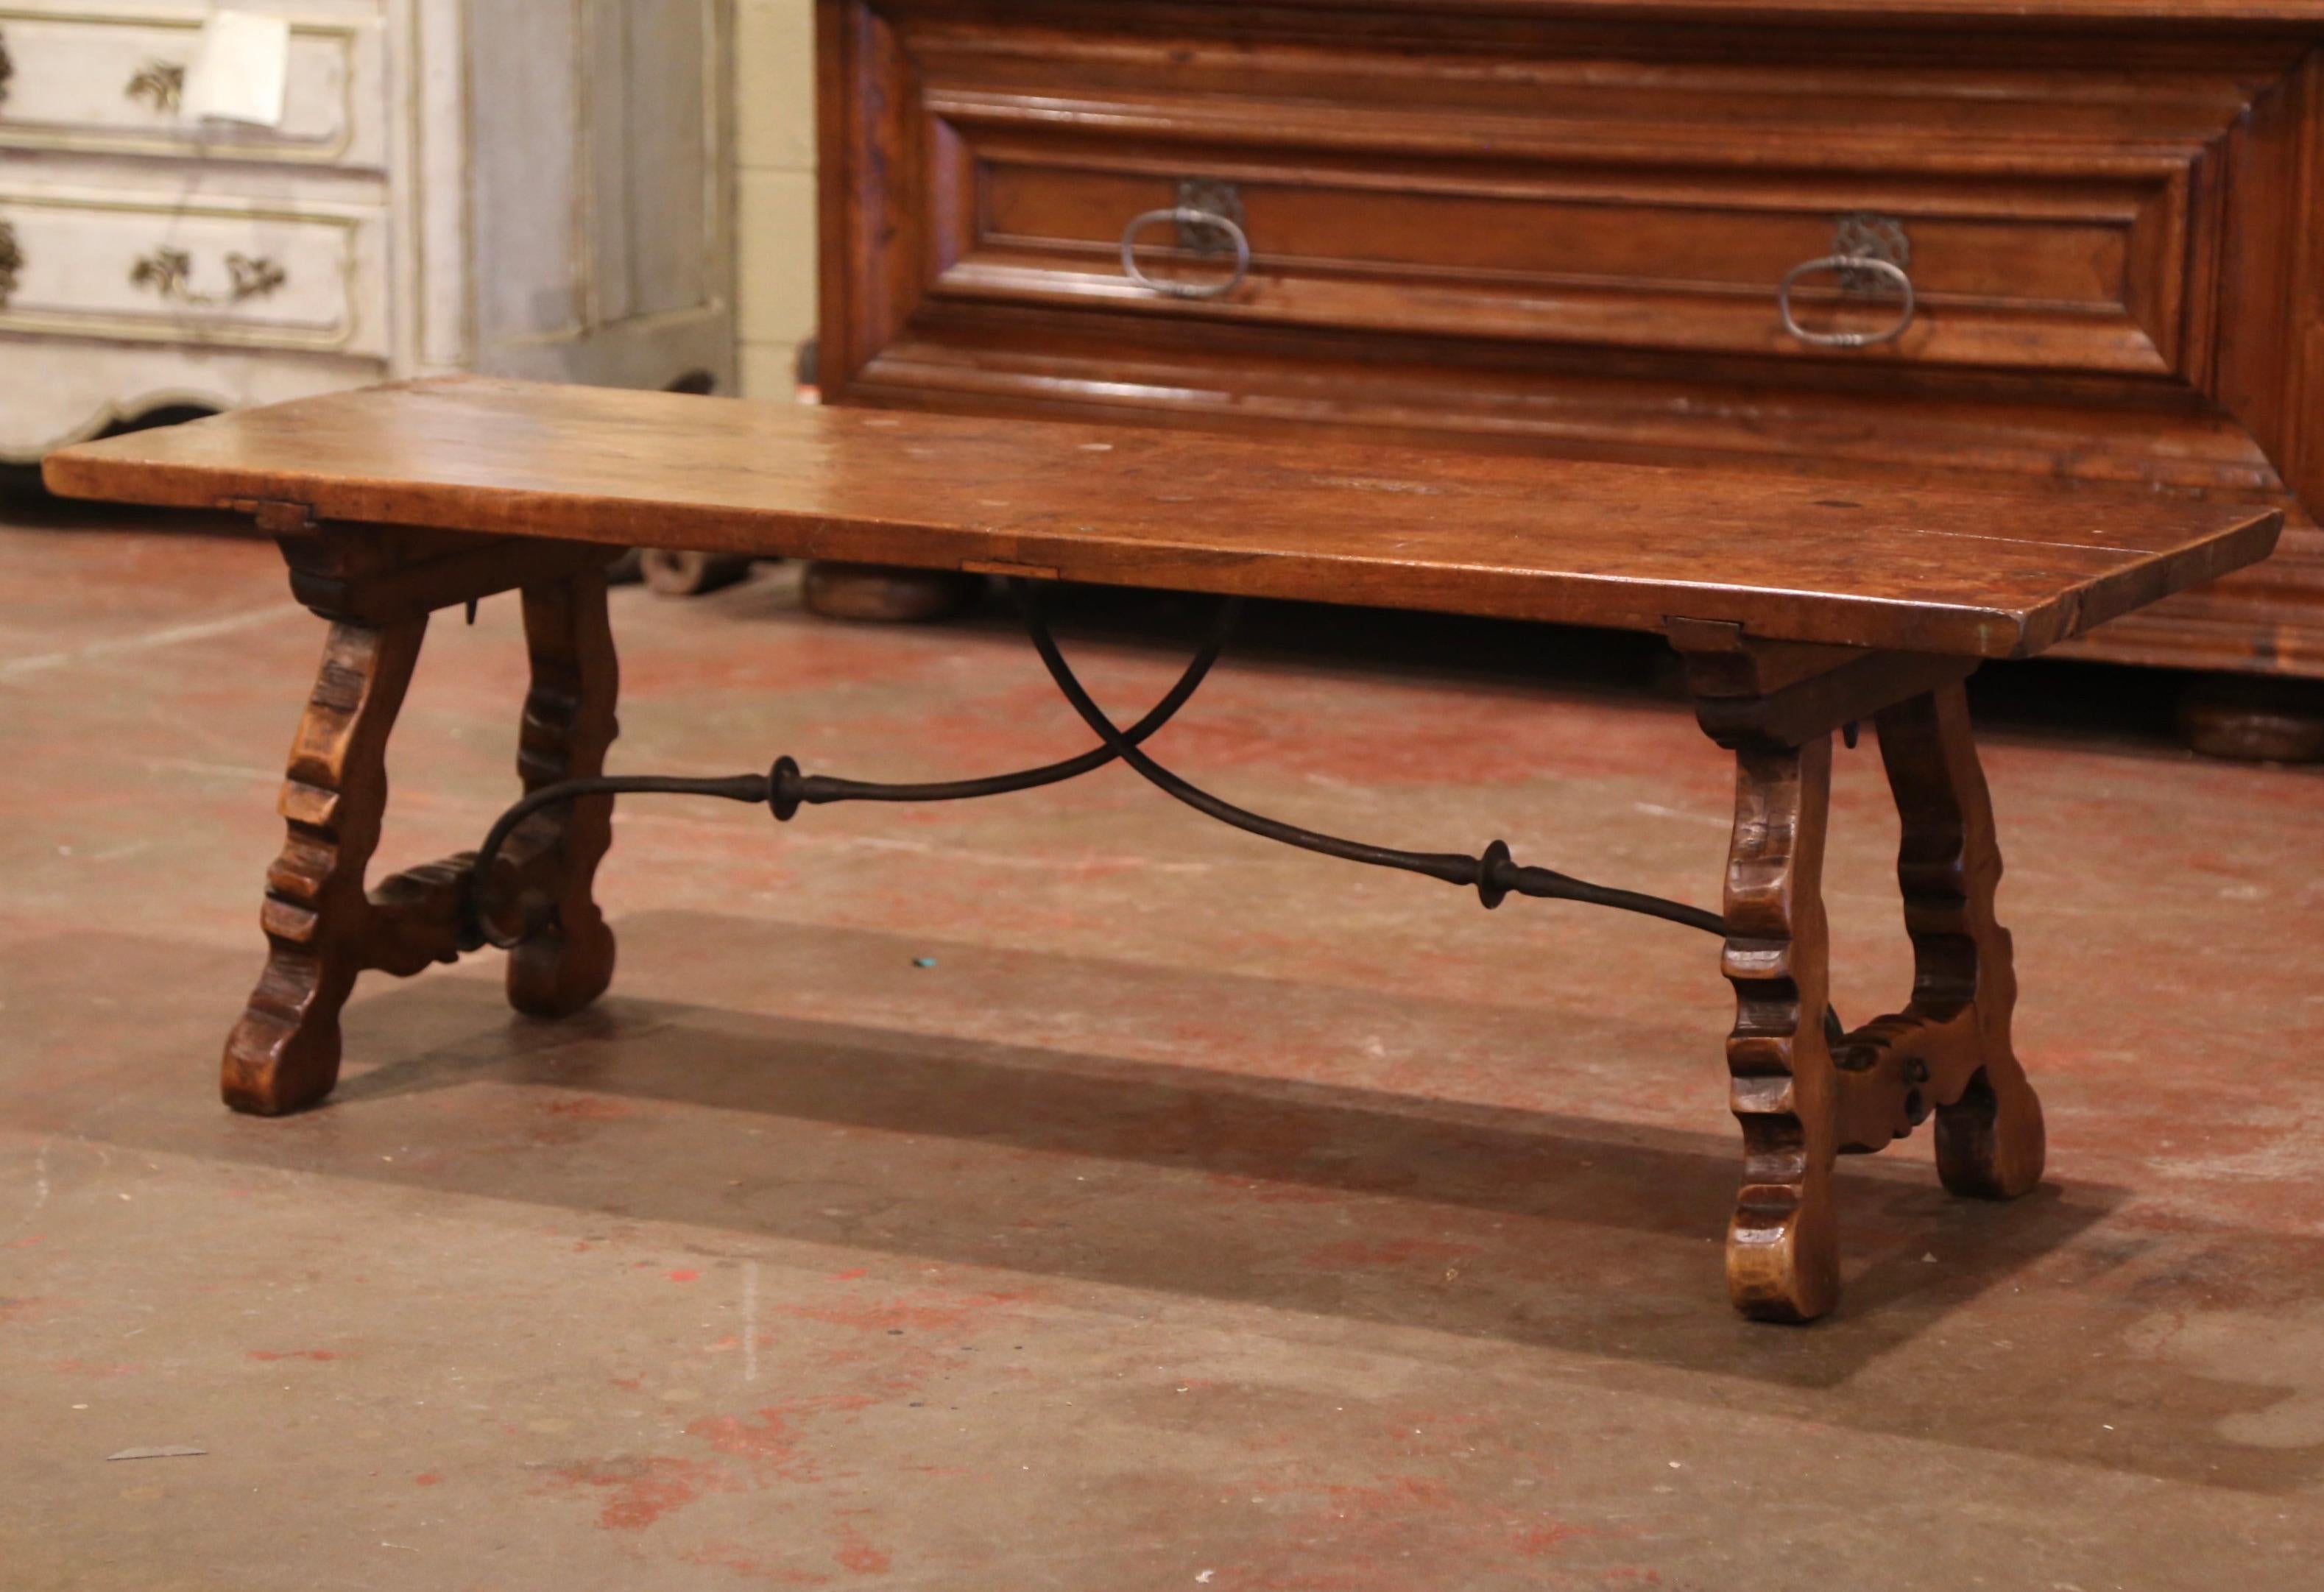 Crafted in Spain circa 1780, the rectangular antique fruit wood coffee table stands on two carved scrolled legs joined together with a forged iron stretcher; the top is built with a single plank of walnut. The long and narrow cocktail table is in